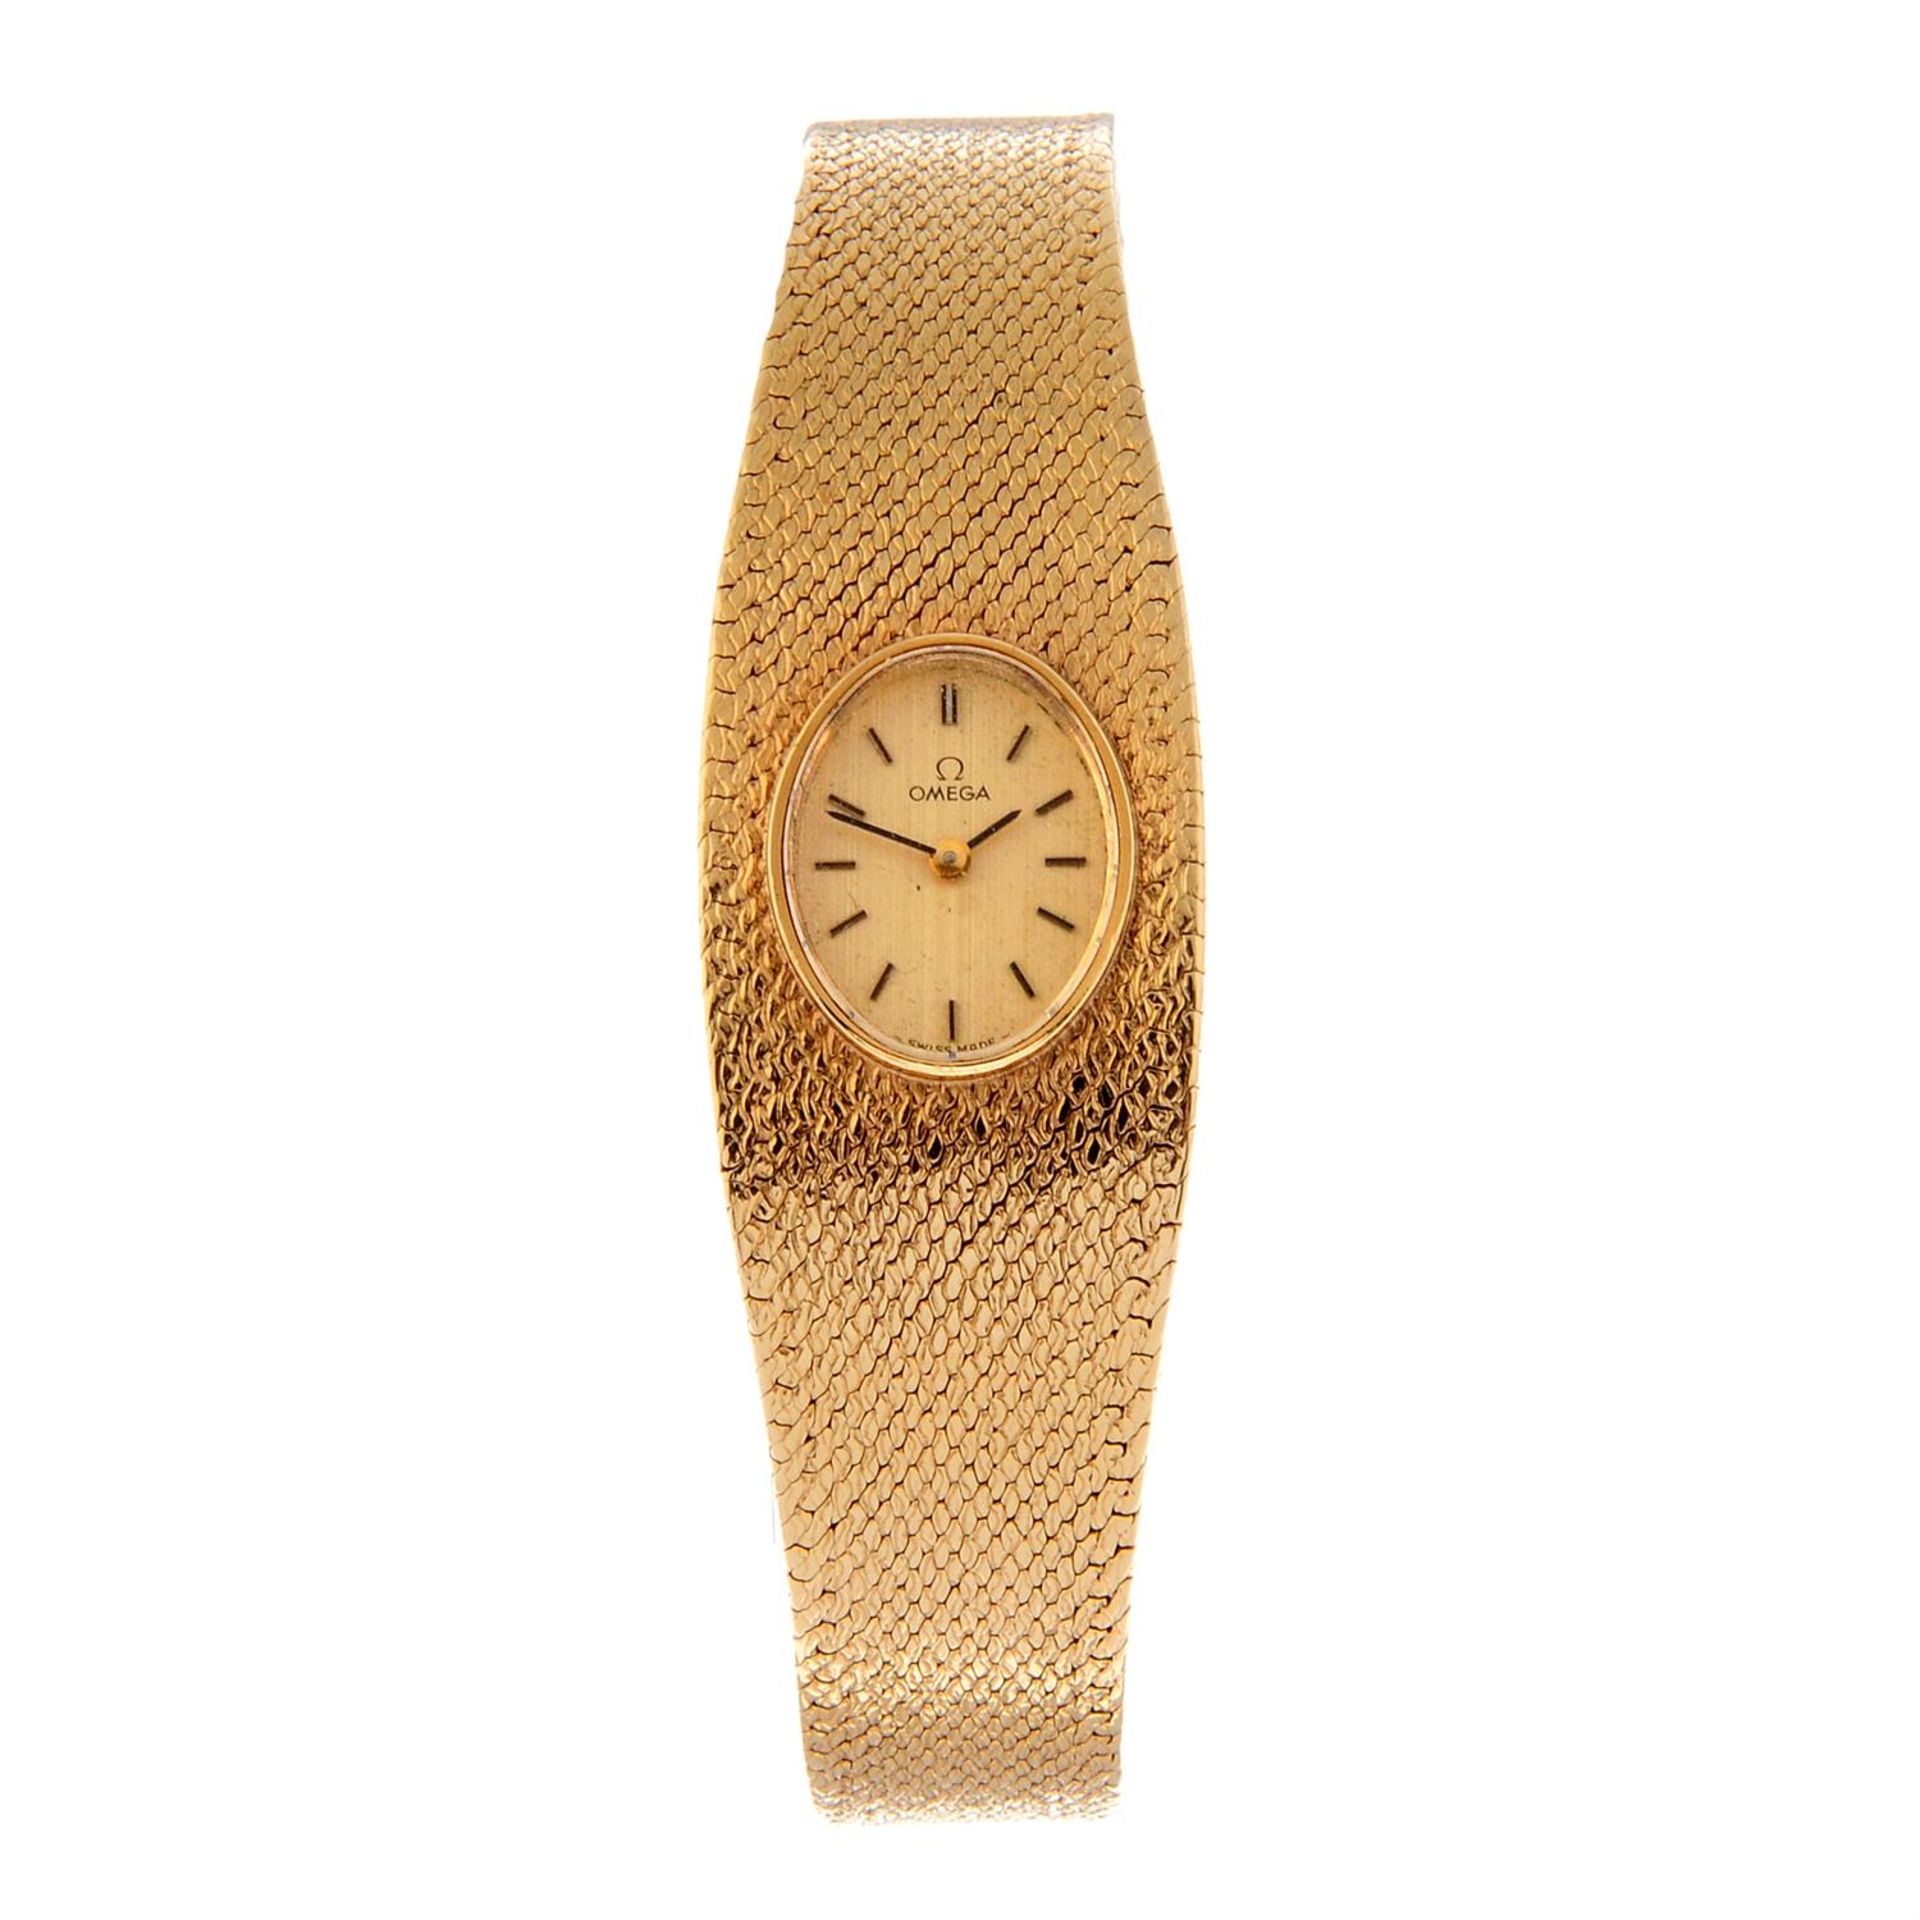 OMEGA - a 9ct yellow gold bracelet watch, 18mm.